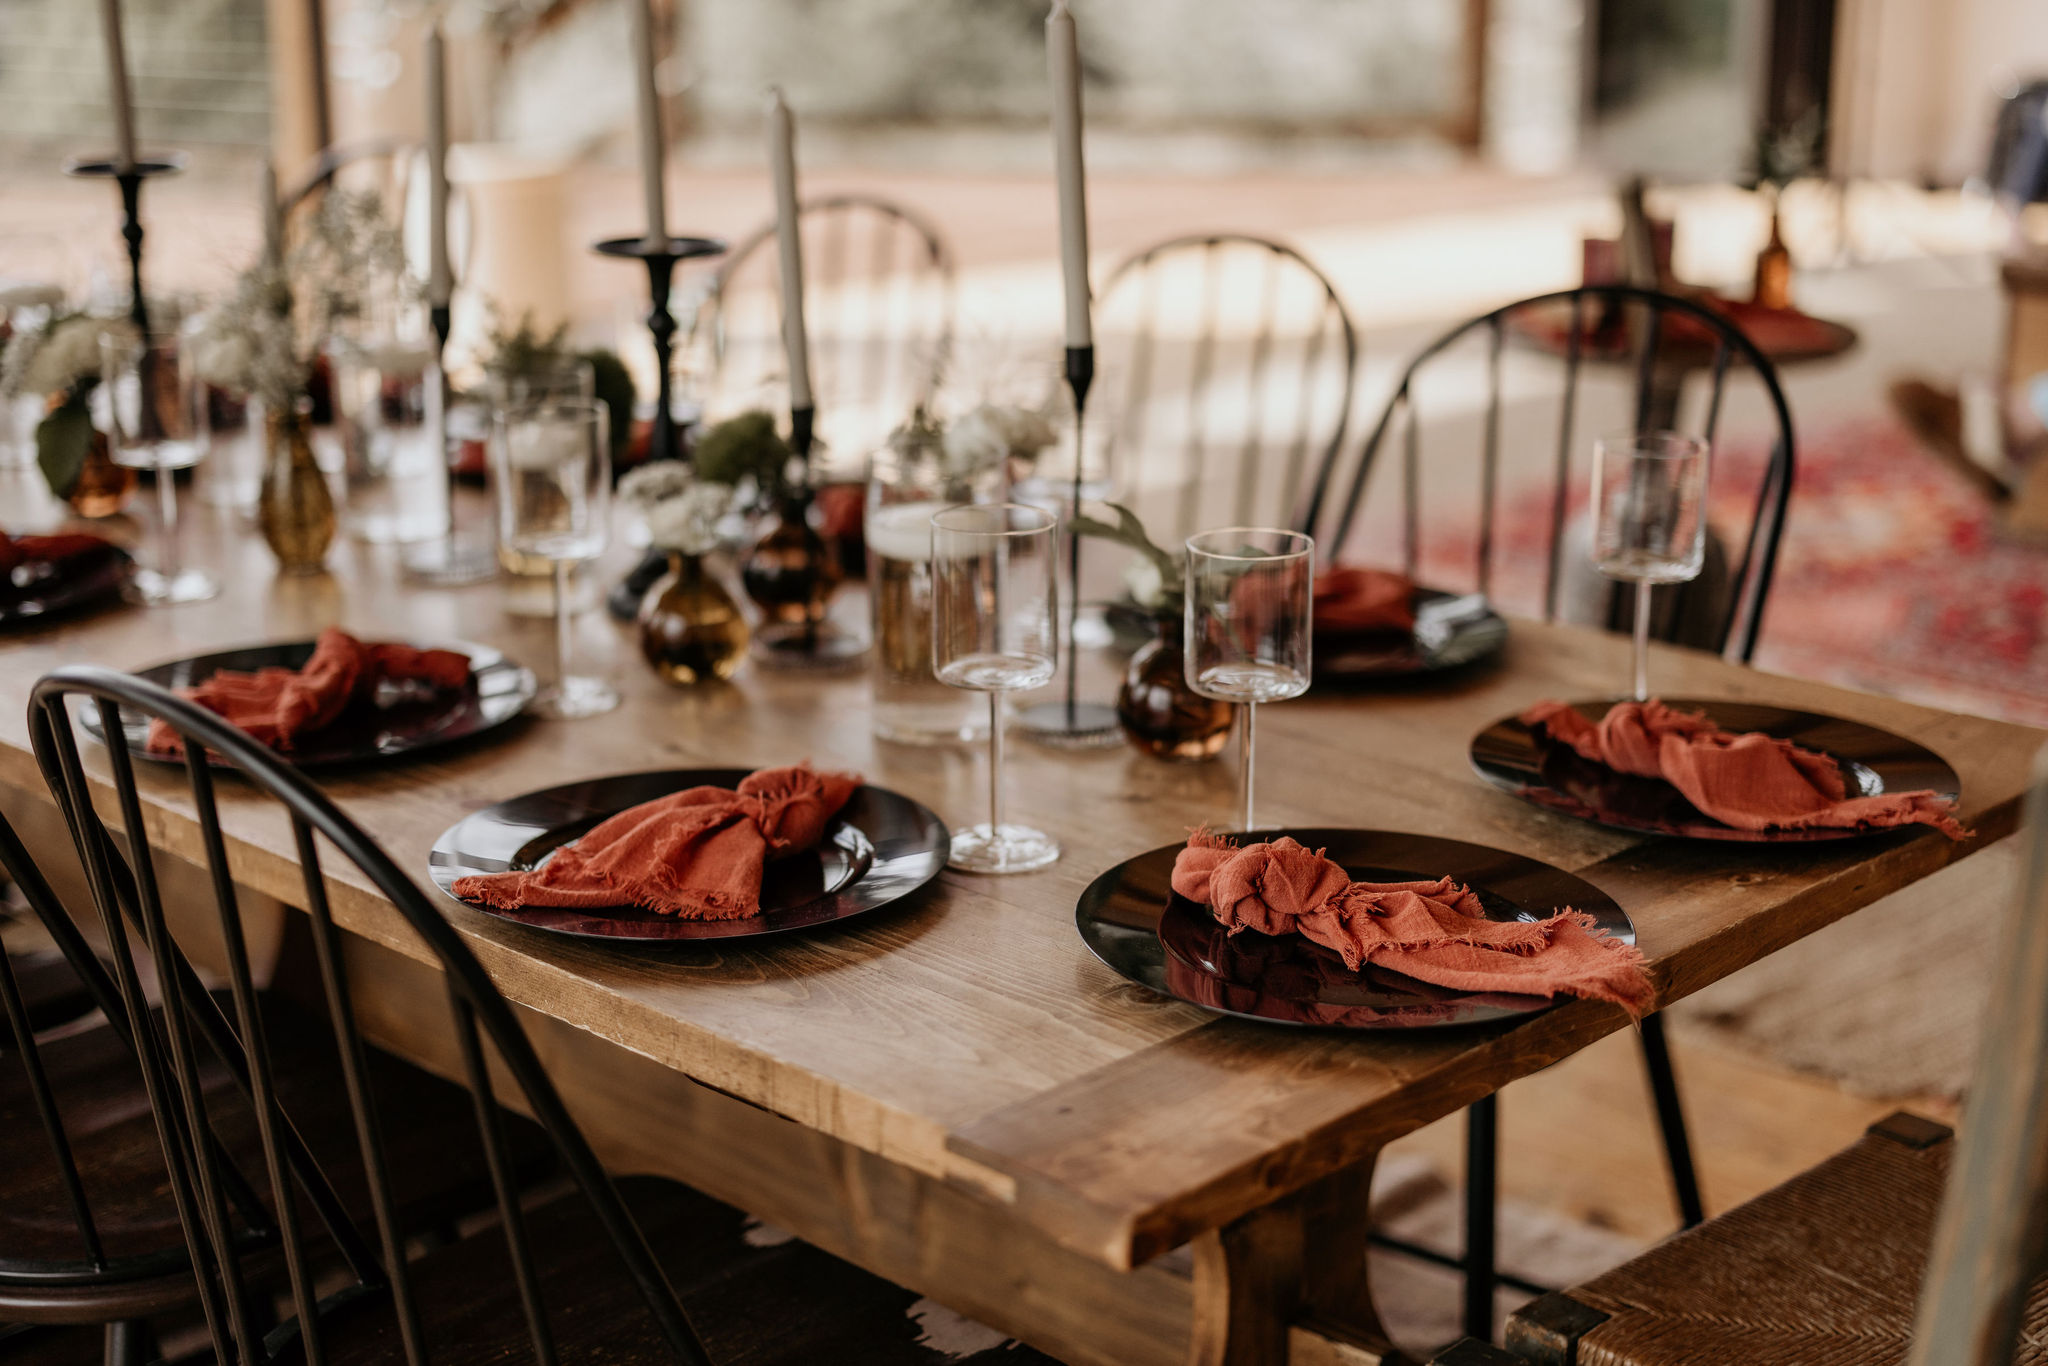 wedding vendor sets up table during private chef dinner at a colorado micro wedding.